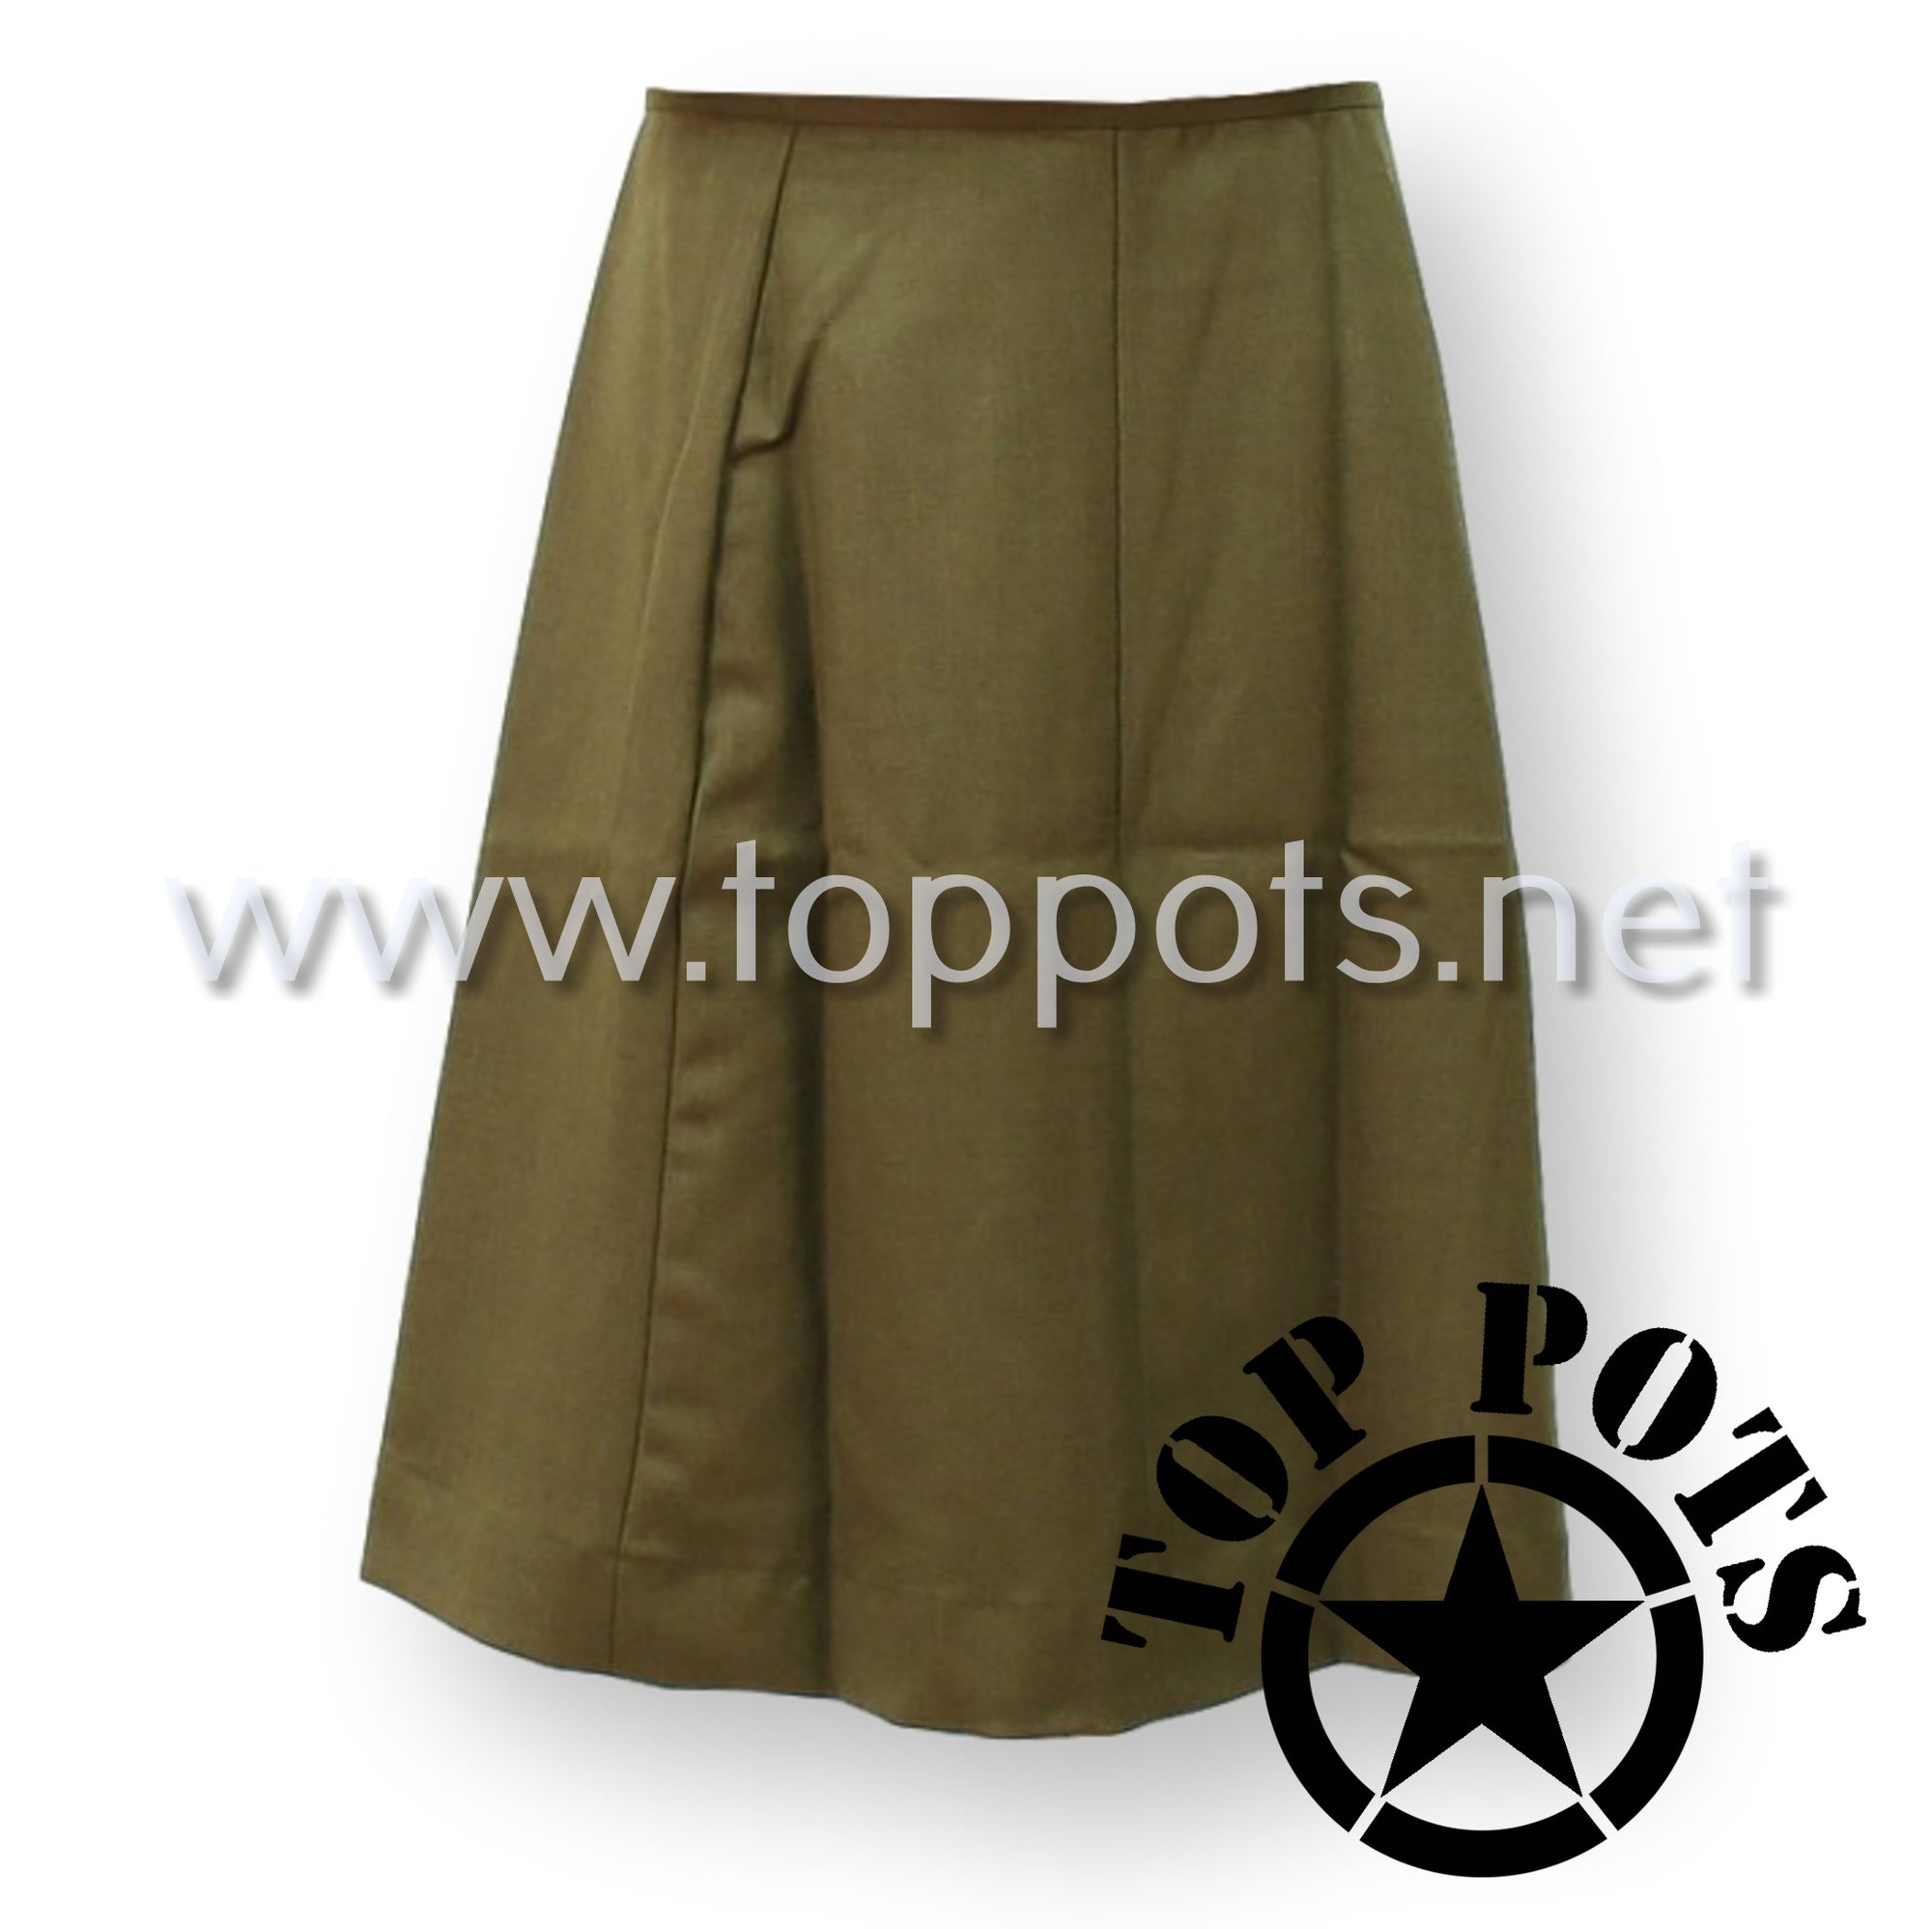 WWII US Army Reproduction Olive Drab Wool WAC Enlisted Uniform – Skirt